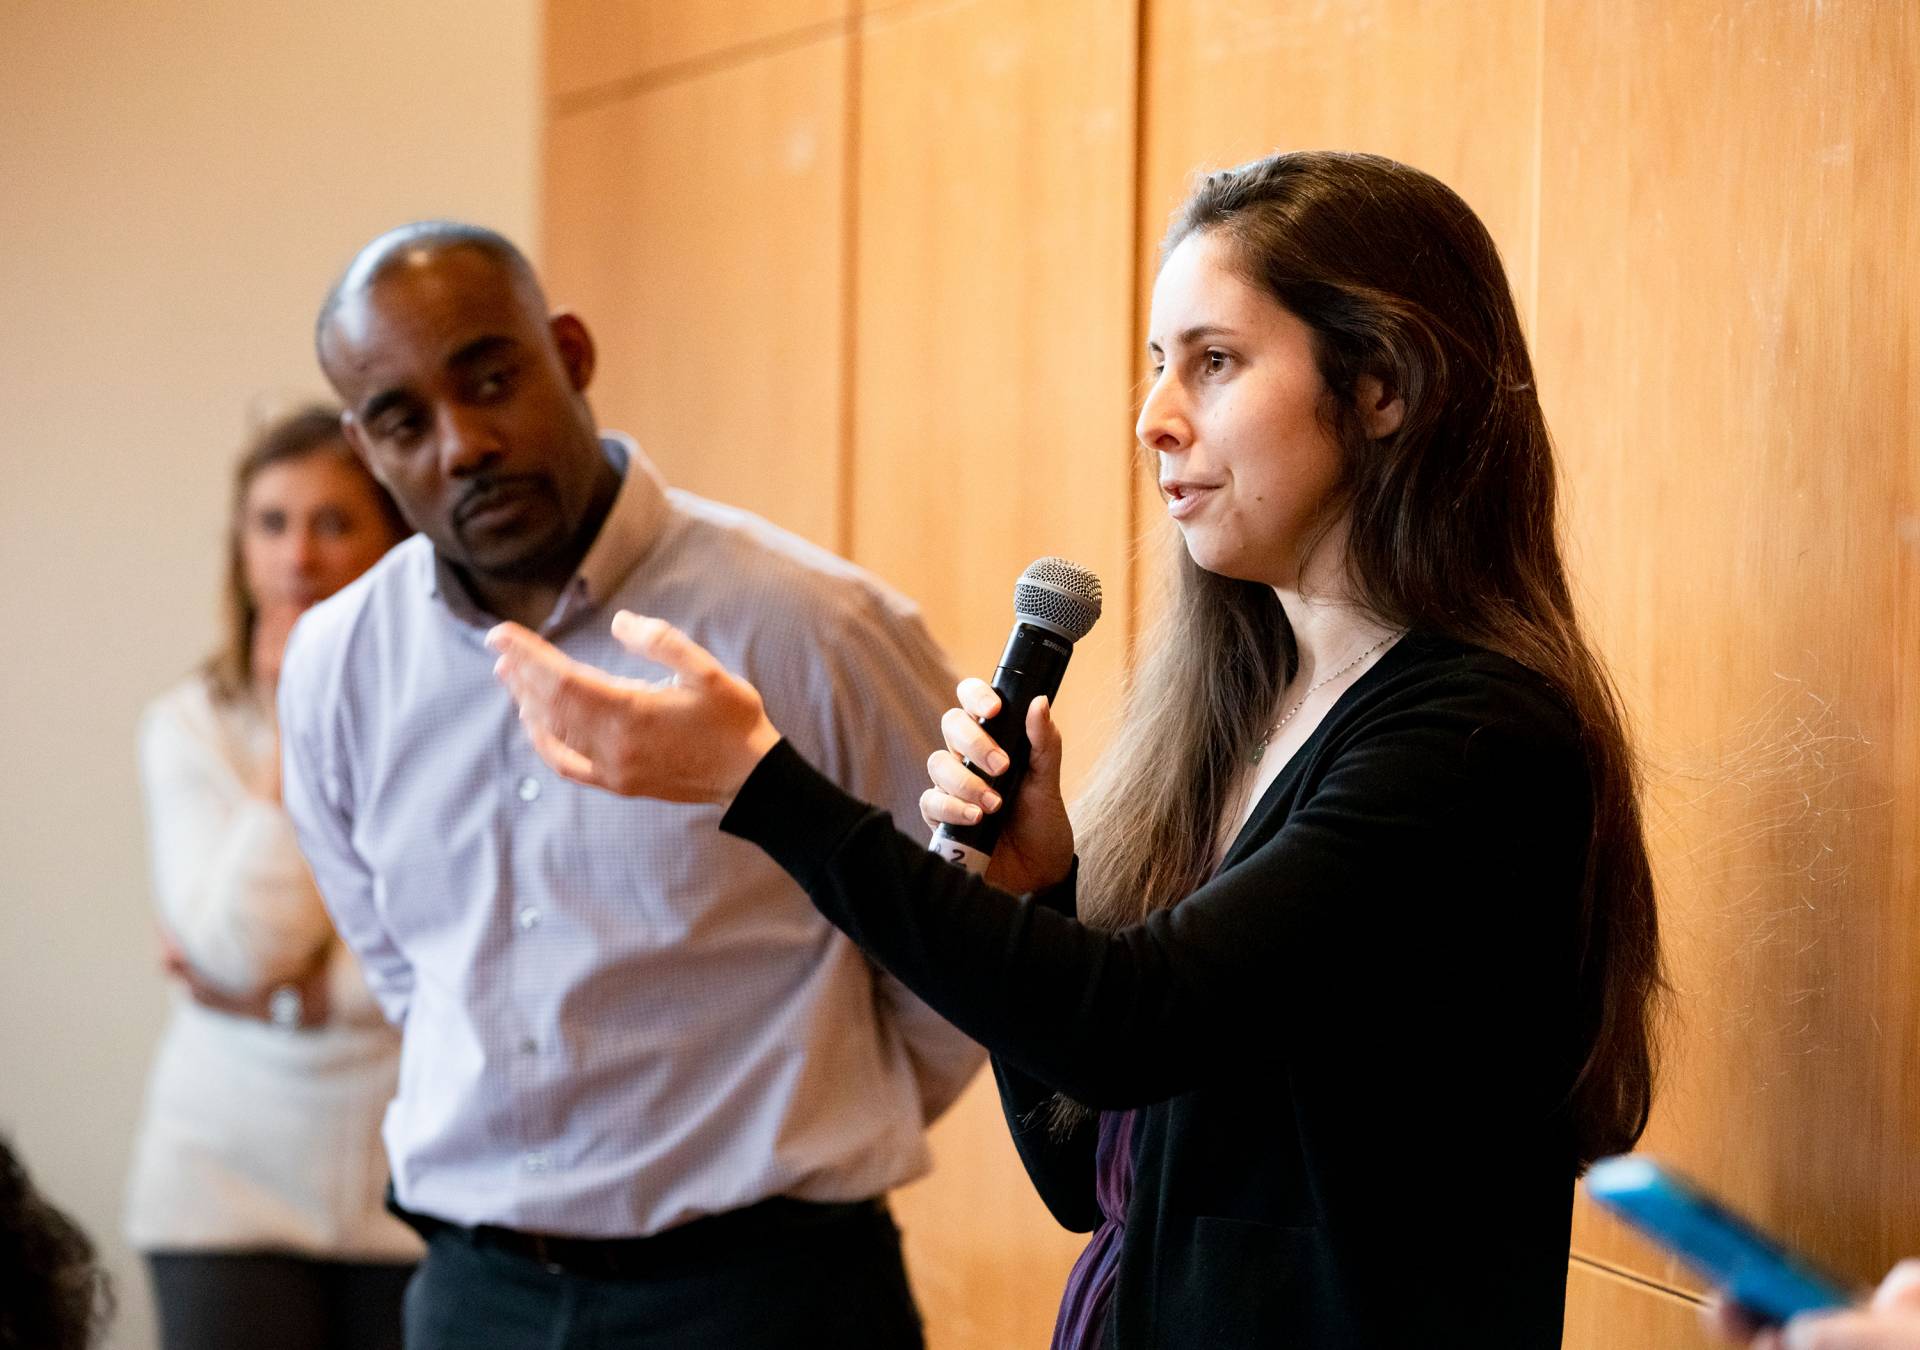 A woman asks a question into a microphone while a man looks on